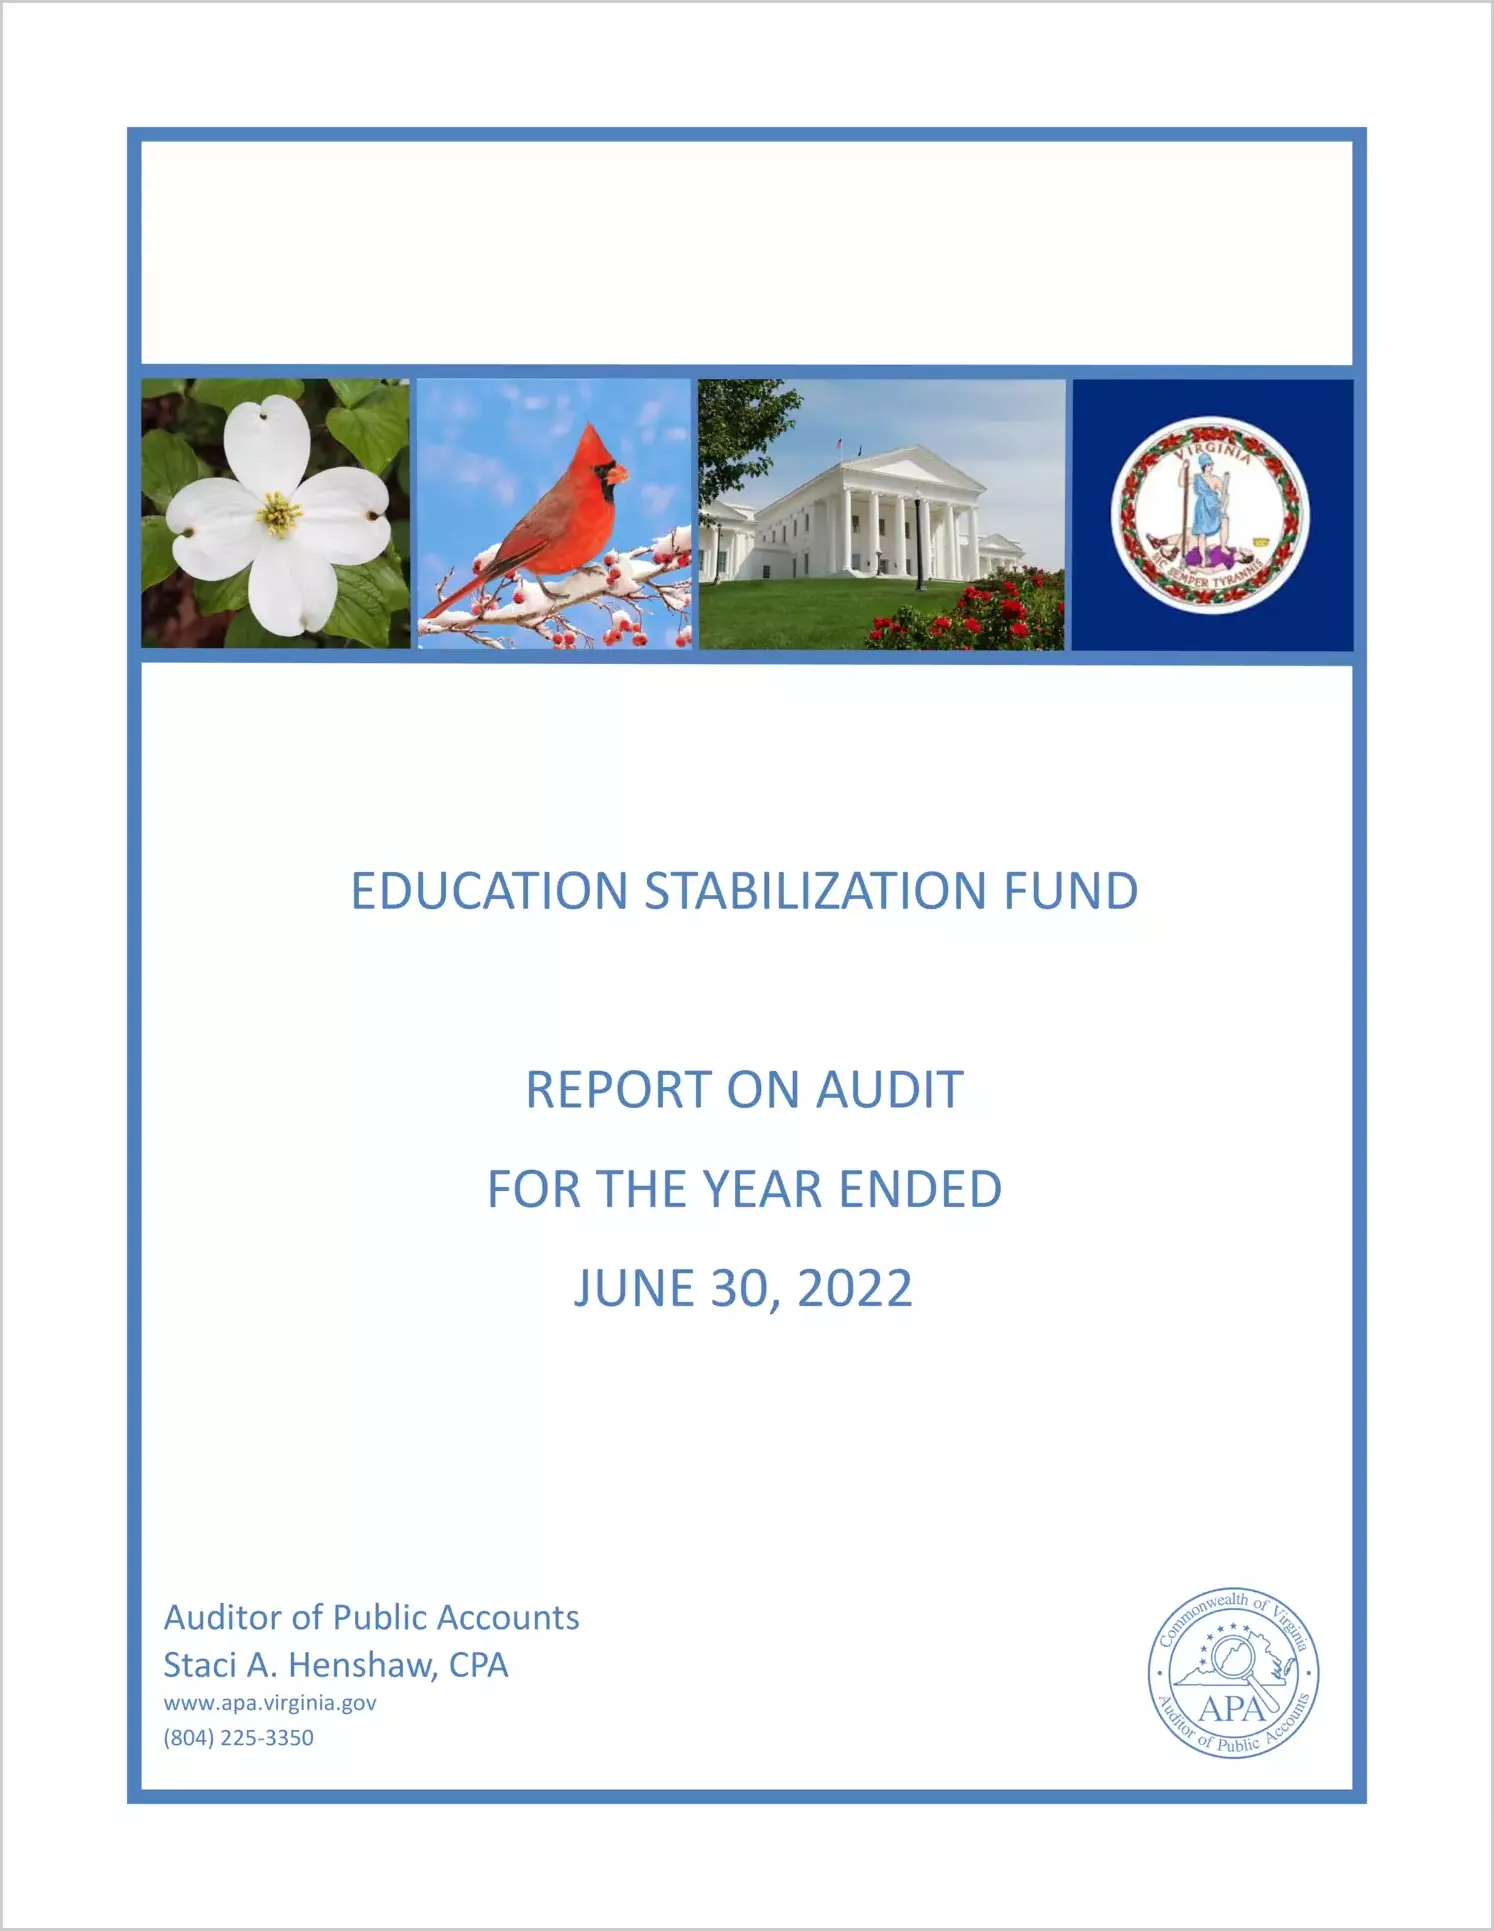 Education Stabilization Fund for the year ended June 30, 2022